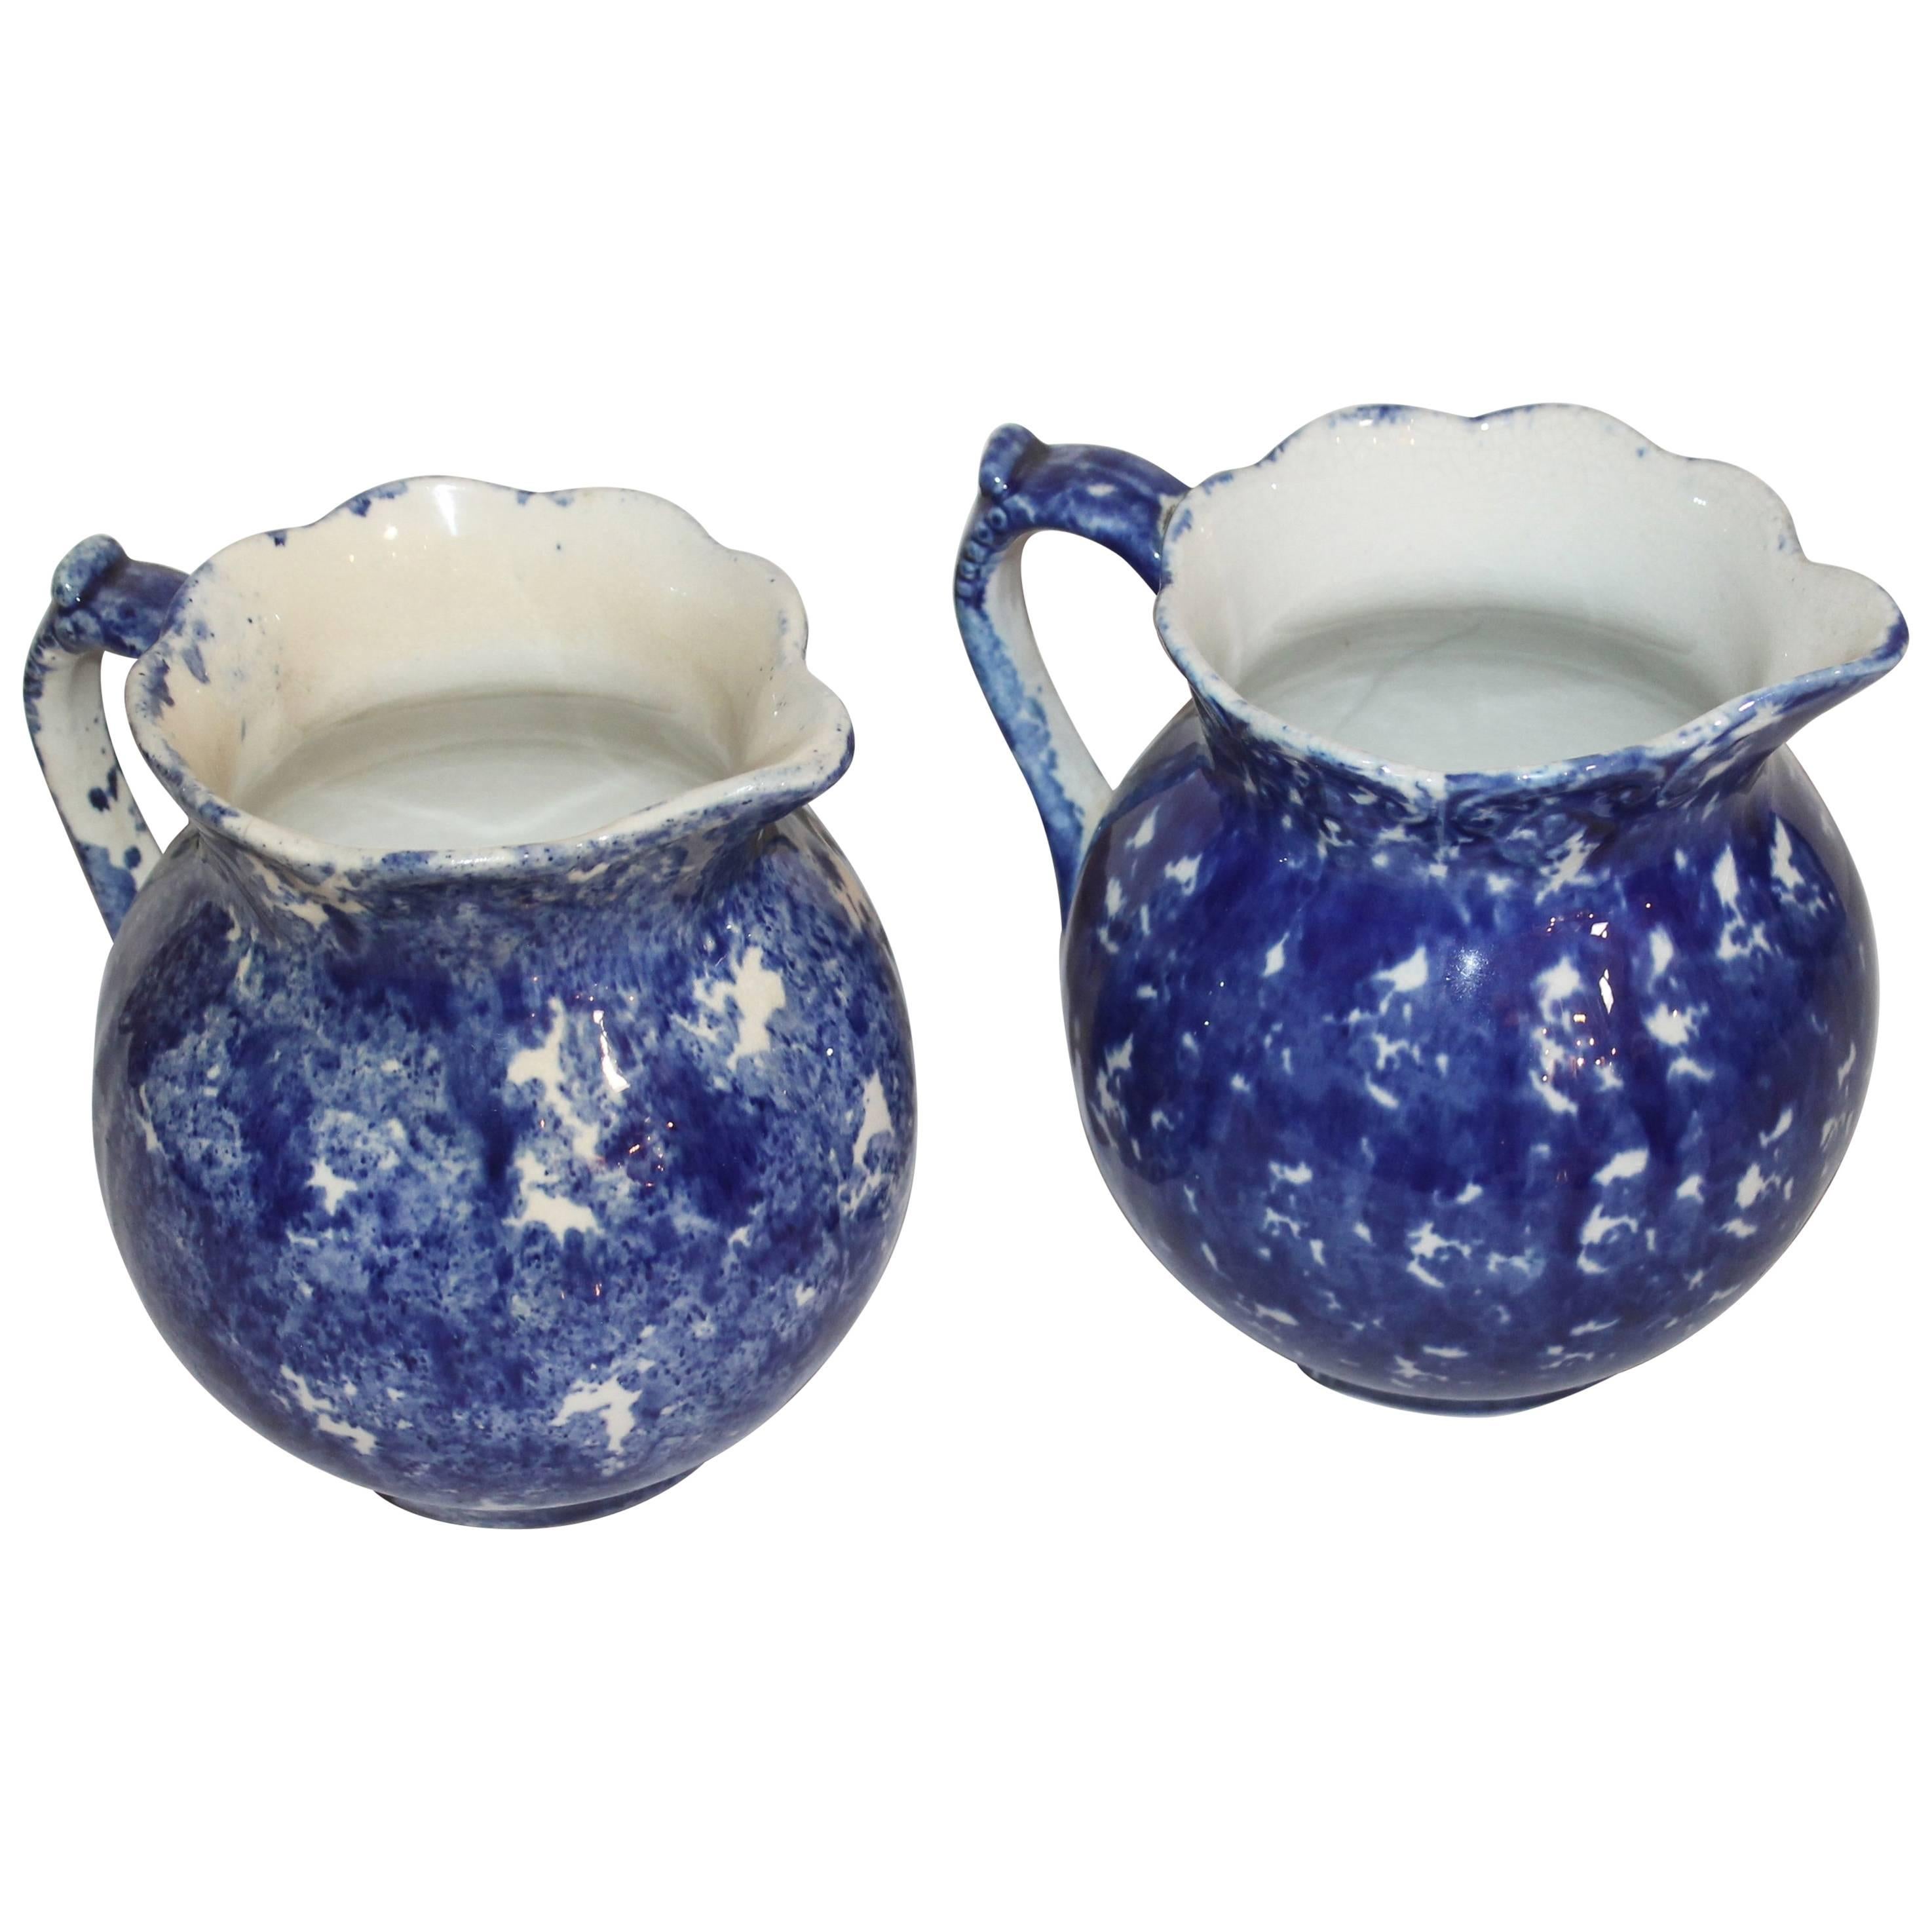 Pair of 19th Century American Sponge Ware Pitchers For Sale